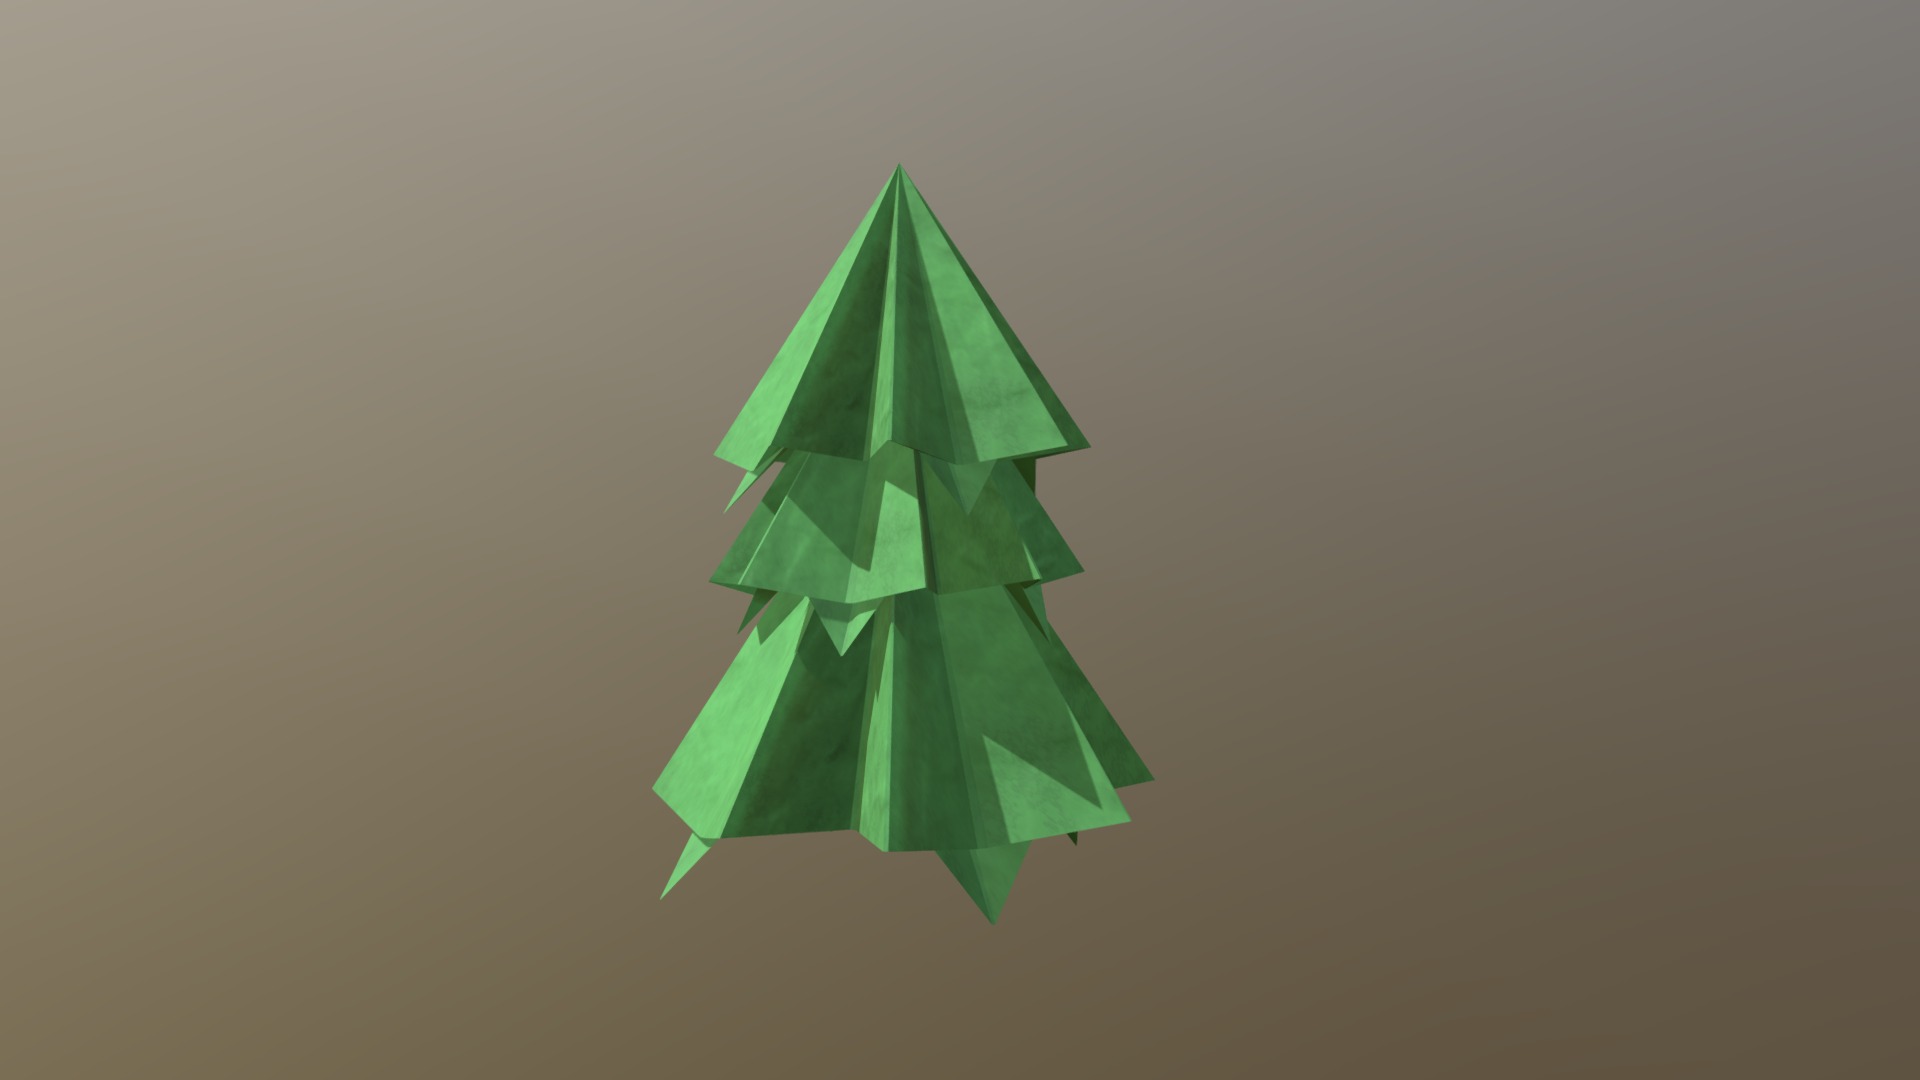 3D model Origami Pine Short - This is a 3D model of the Origami Pine Short. The 3D model is about a green origami on a white background.